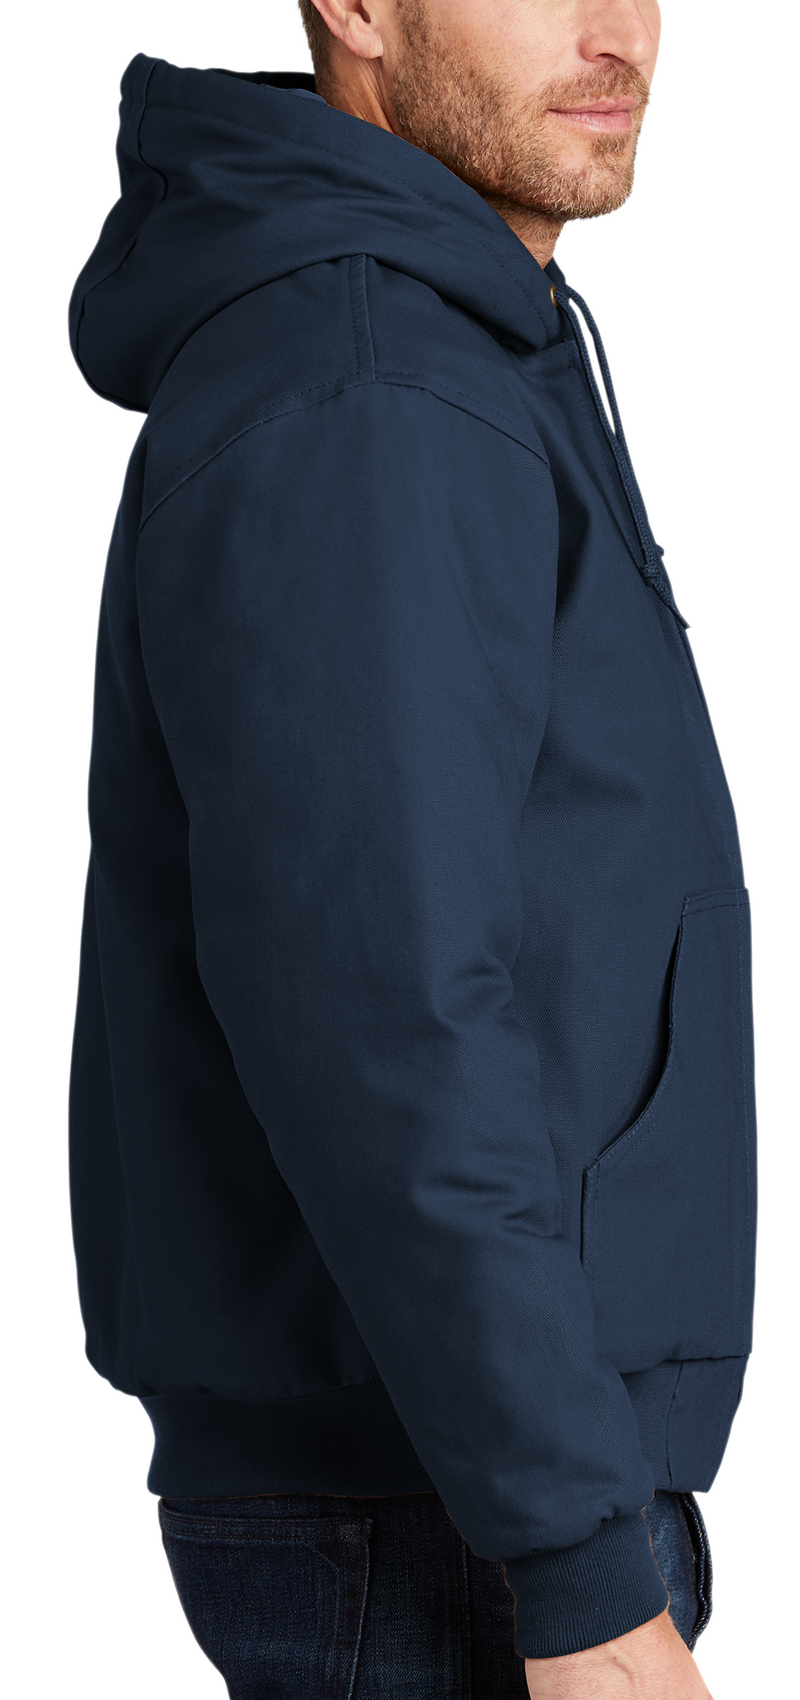 CornerStone [J763H] Duck Cloth Hooded Work Jacket. Live Chat For Bulk Discounts.